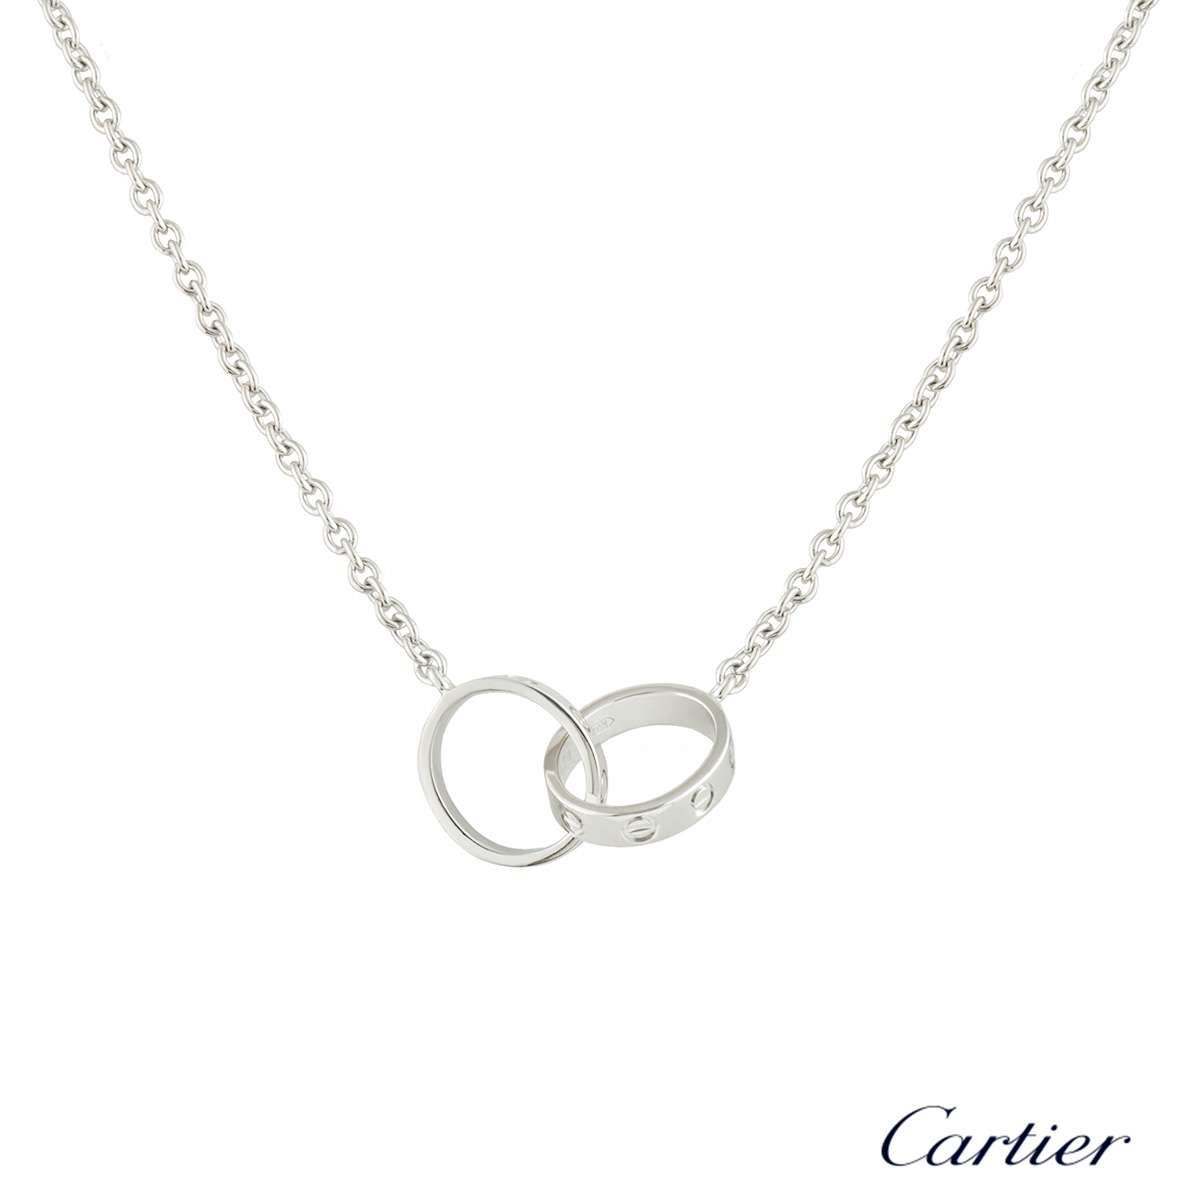 cartier love necklace white gold